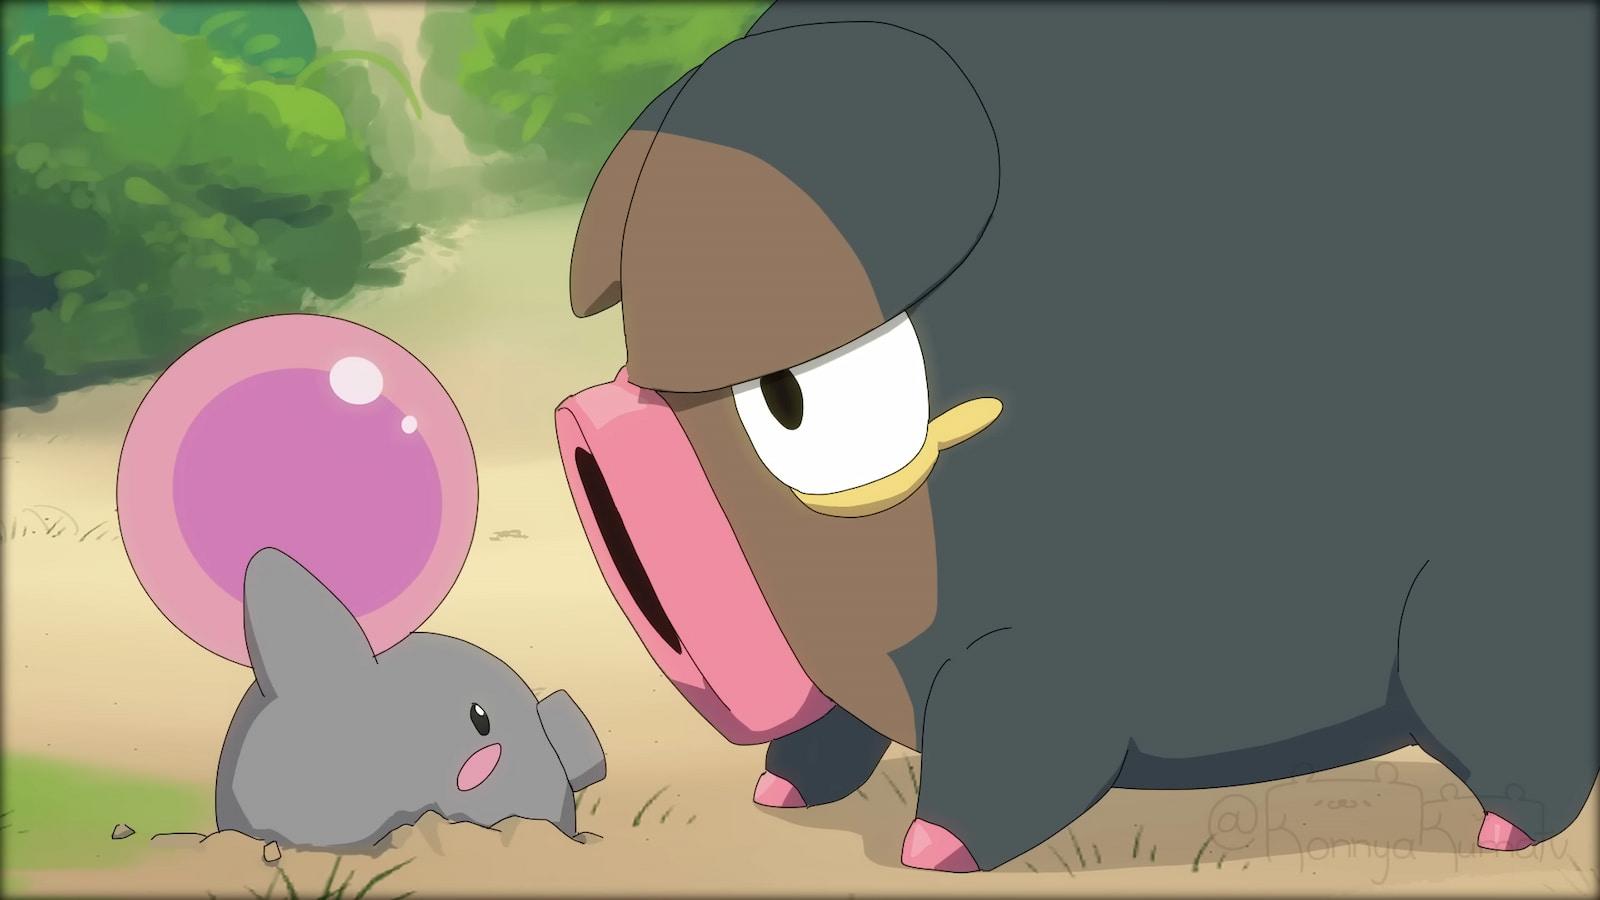 Lechonk finds a Spoink in the Pokemon anime